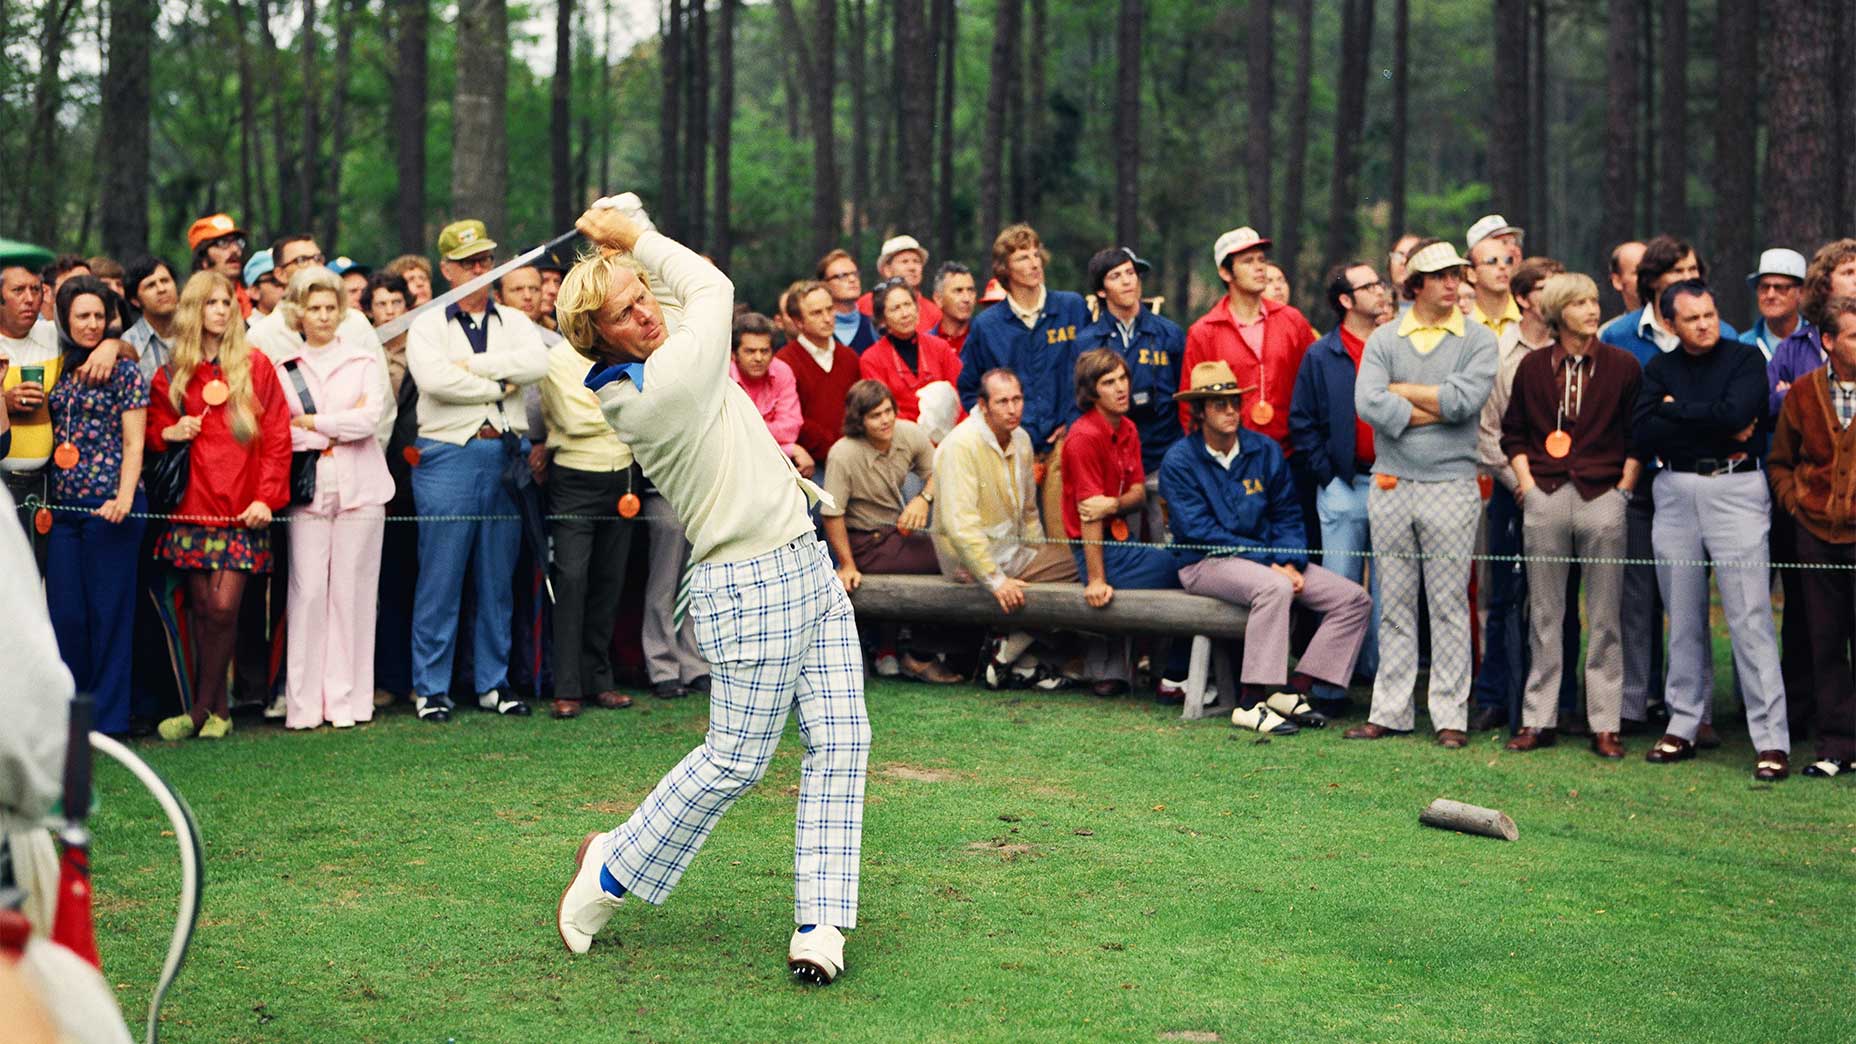 Jack Nicklaus tees off at the 1972 Masters.